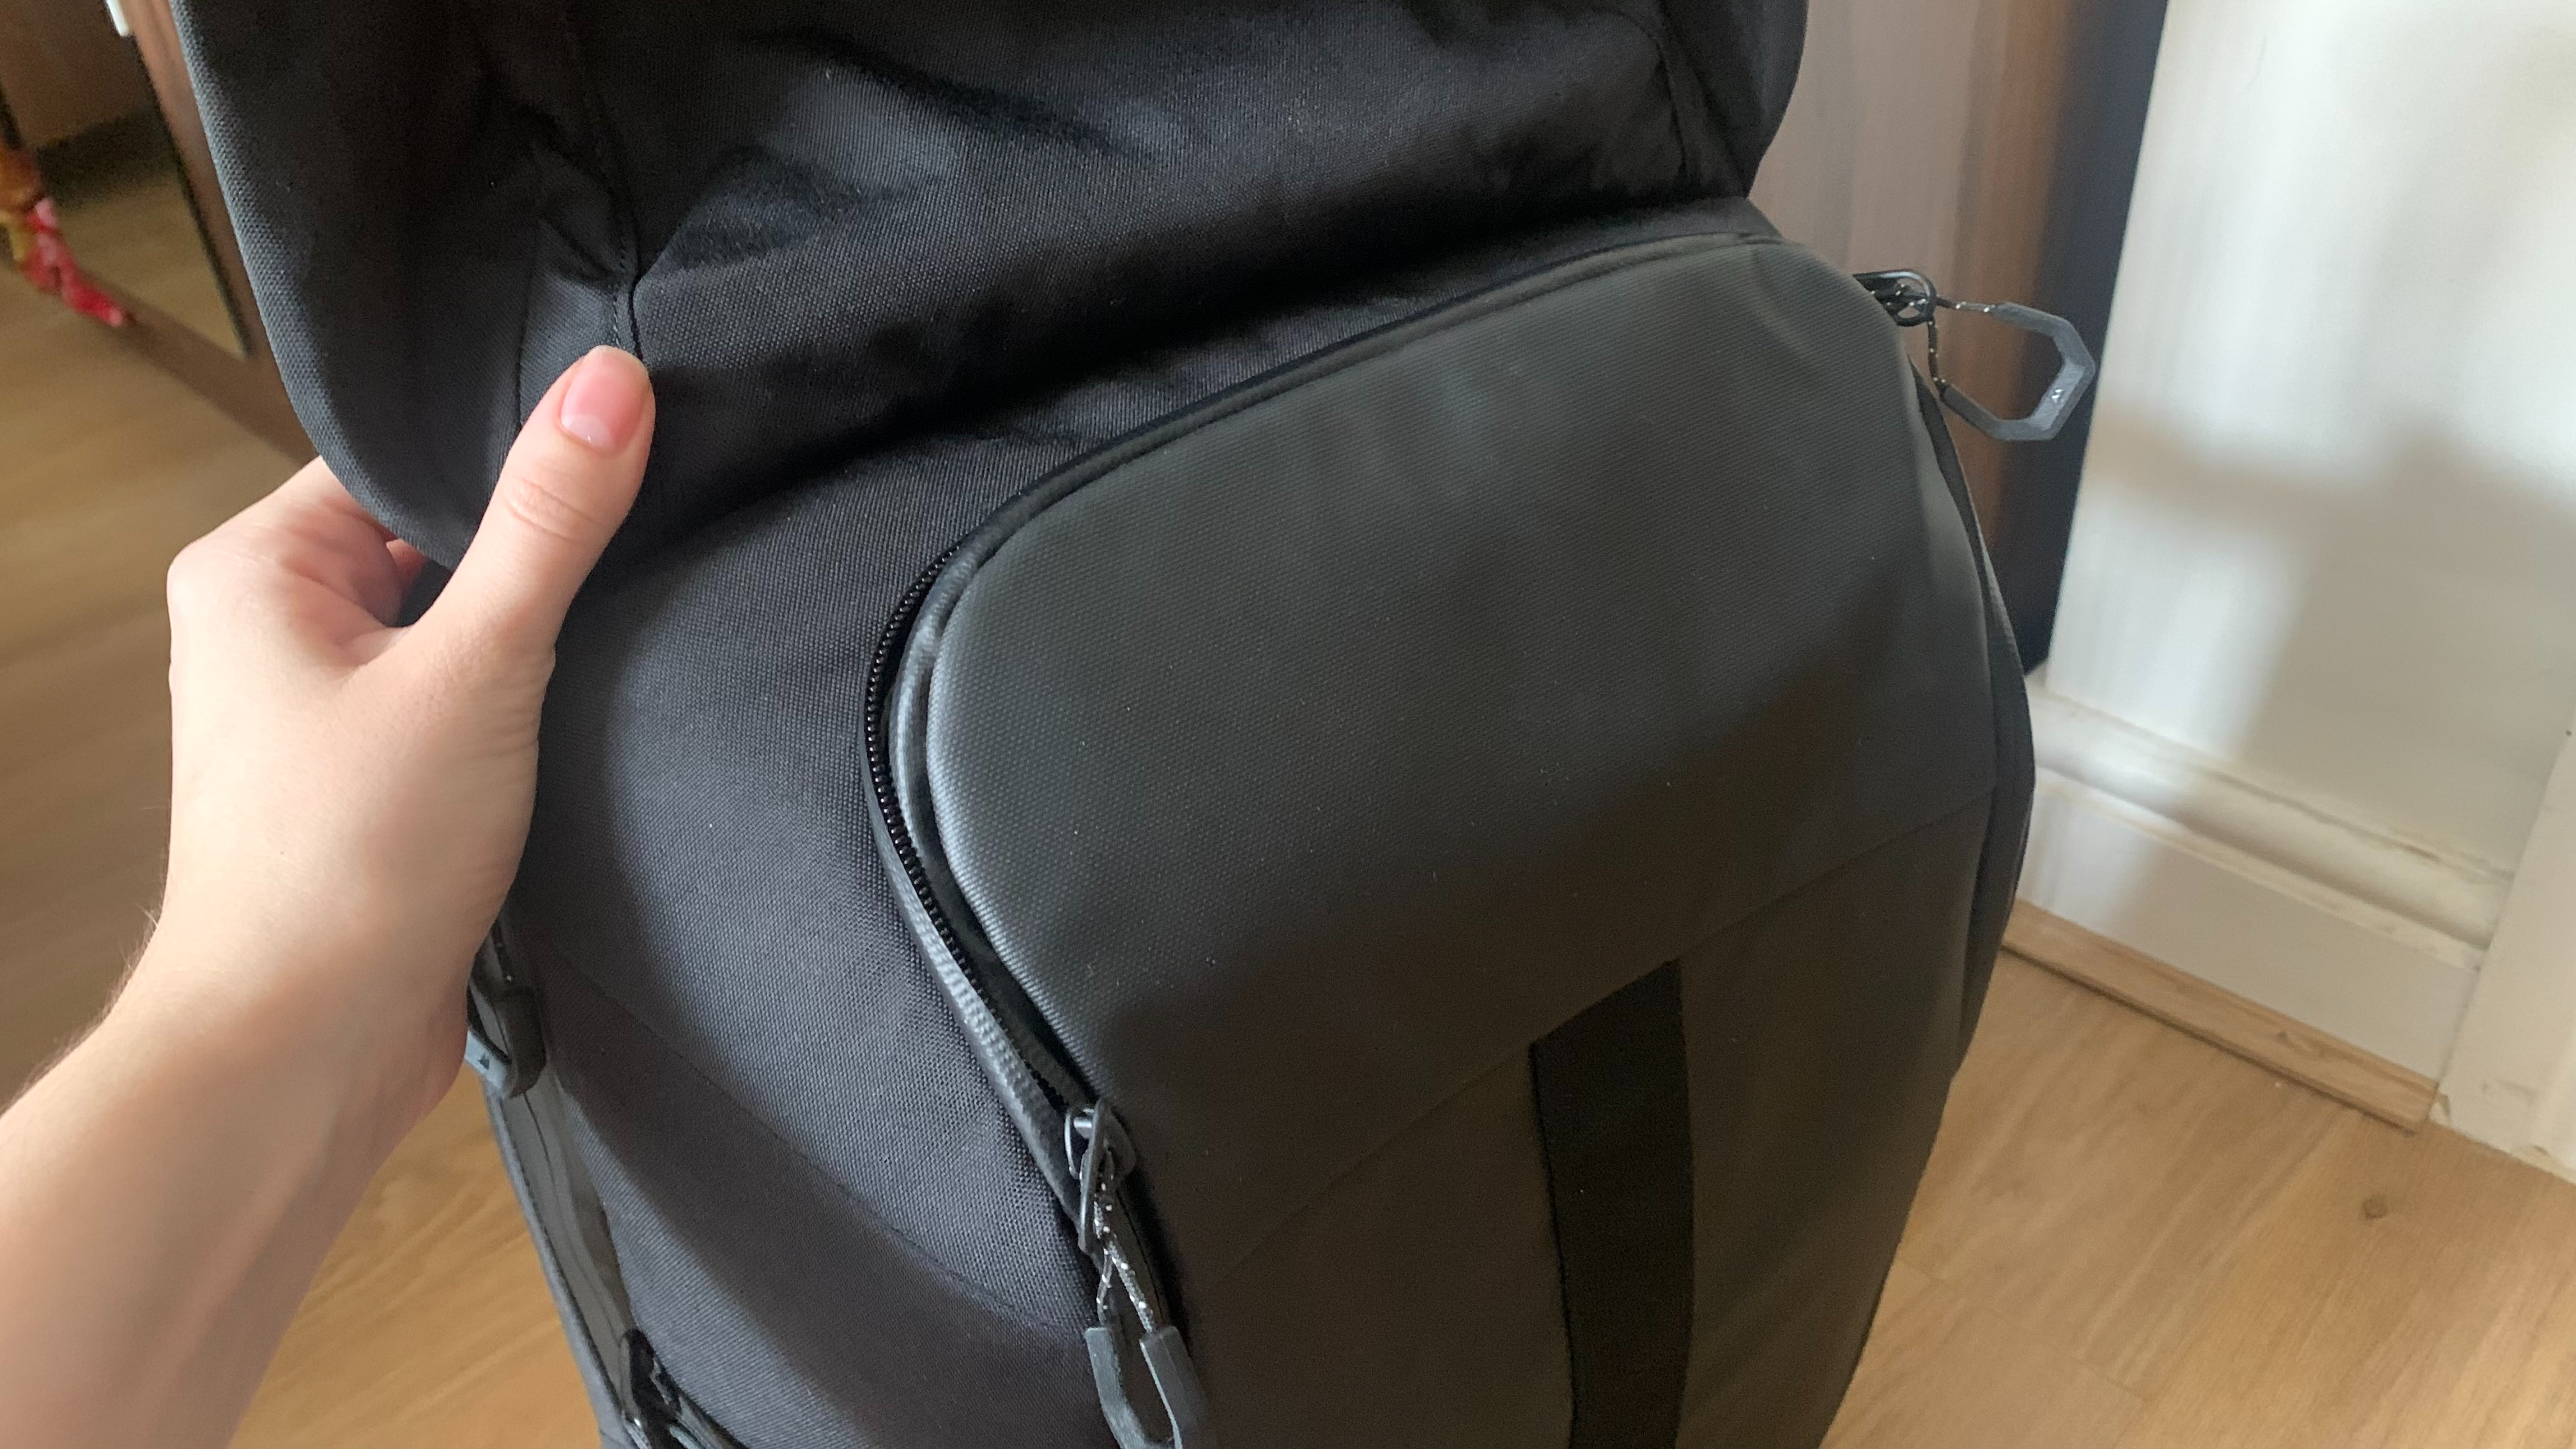 Mous 25L backpack YKK Zzippers